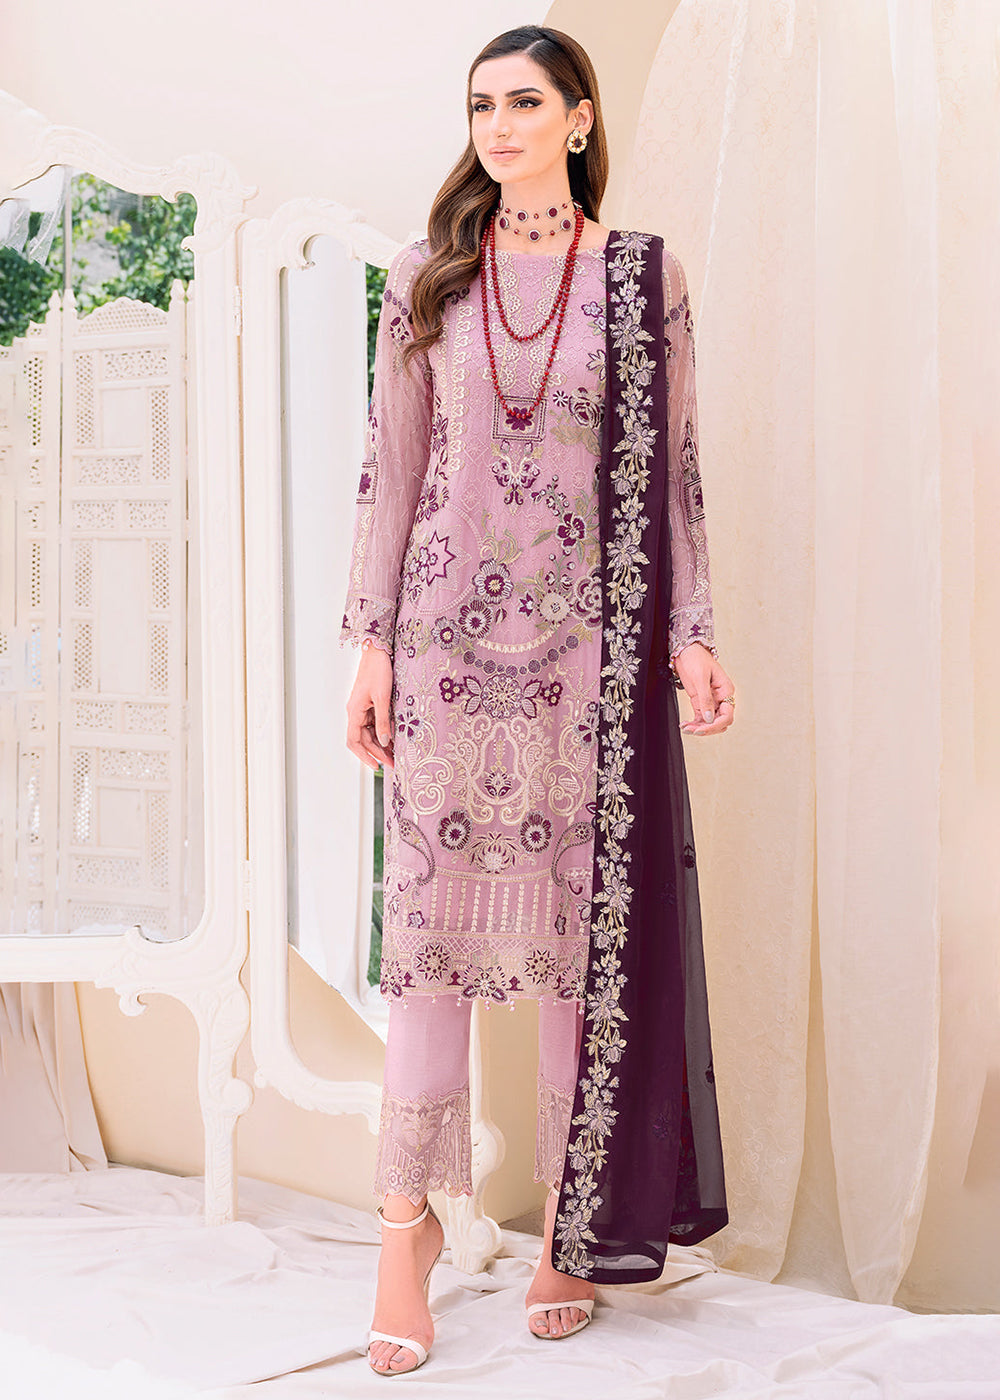 Buy Now Mauve Embroidered Suit - Chiffon Vol 23 by Ramsha - #F-2312 Online in USA, UK, Canada & Worldwide at Empress Clothing.